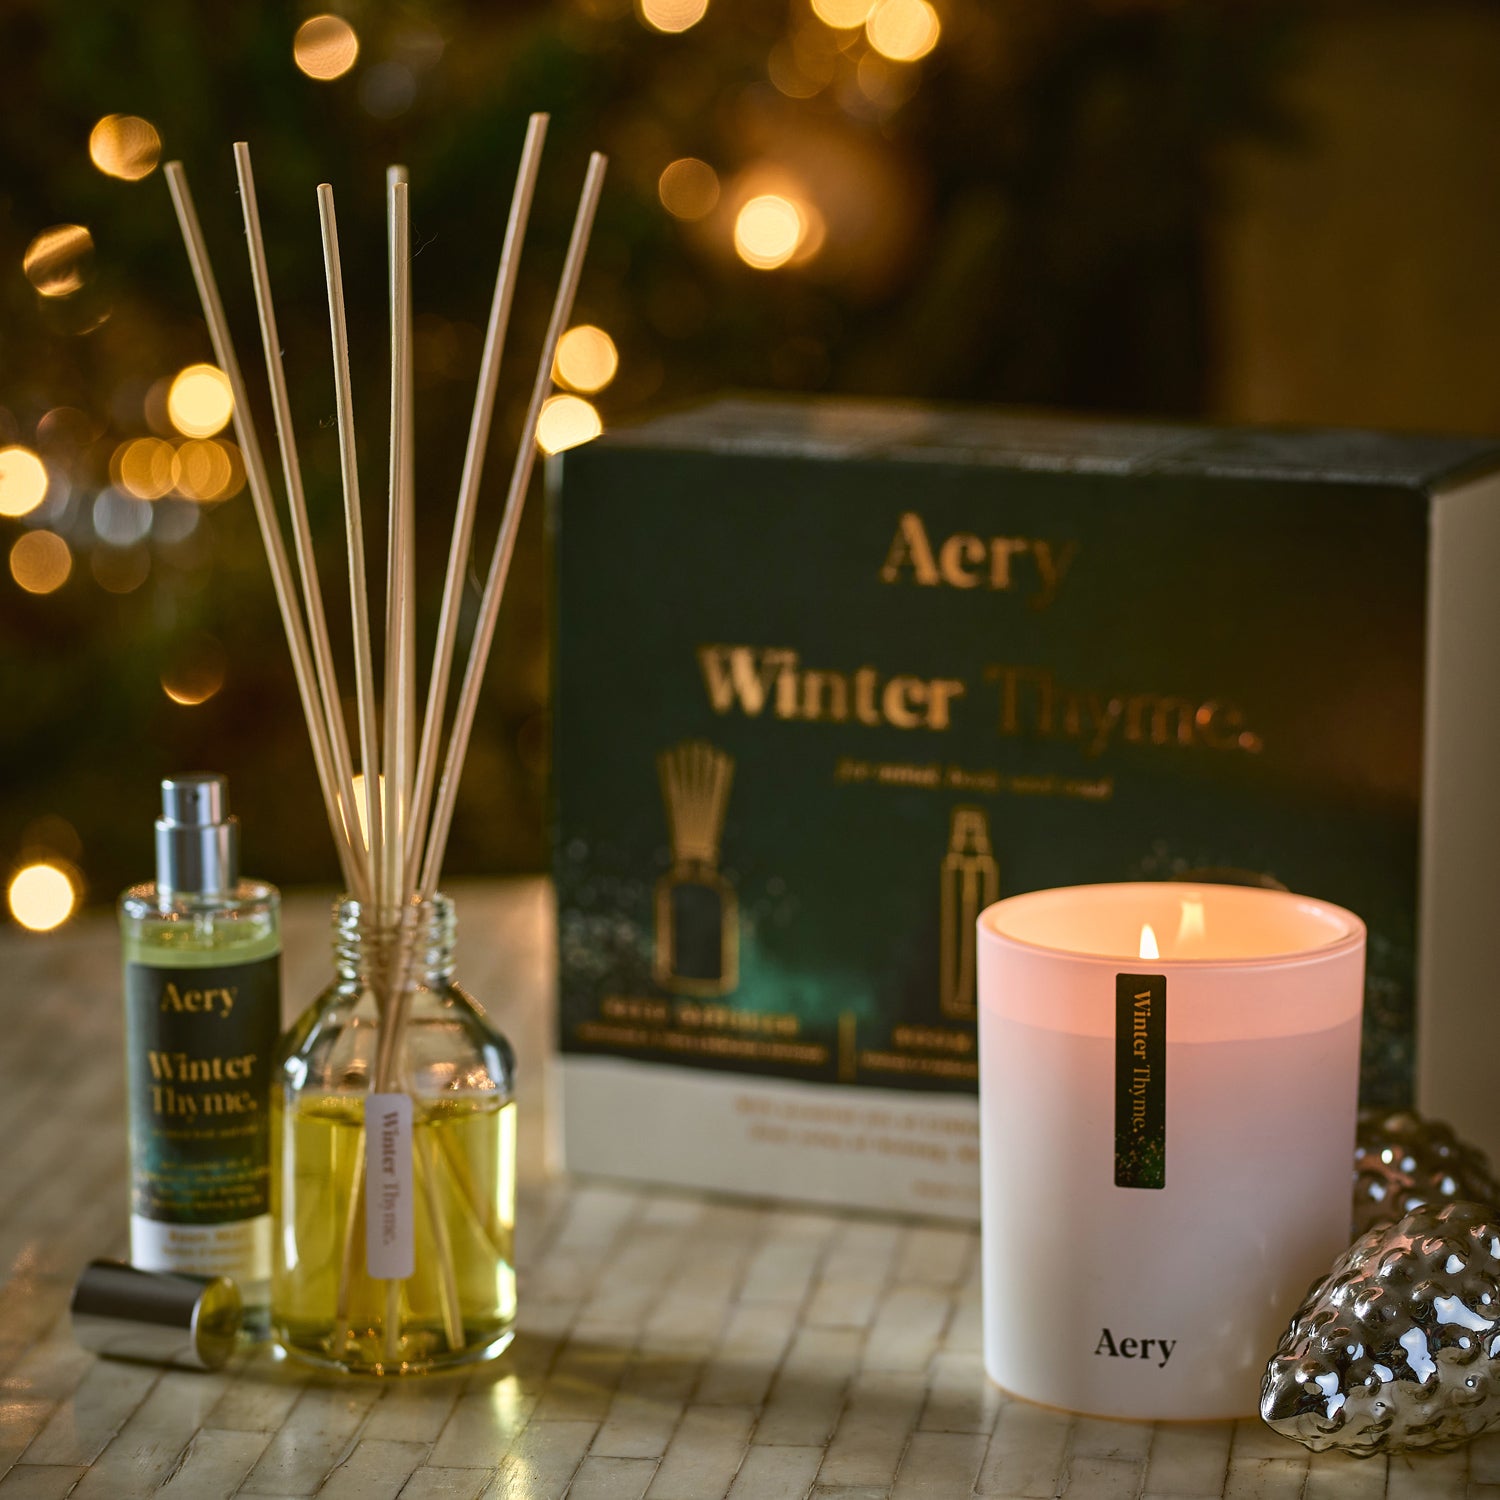 winter thyme gift set of candle reed diffuser and room mist displayed in christmas festive setting